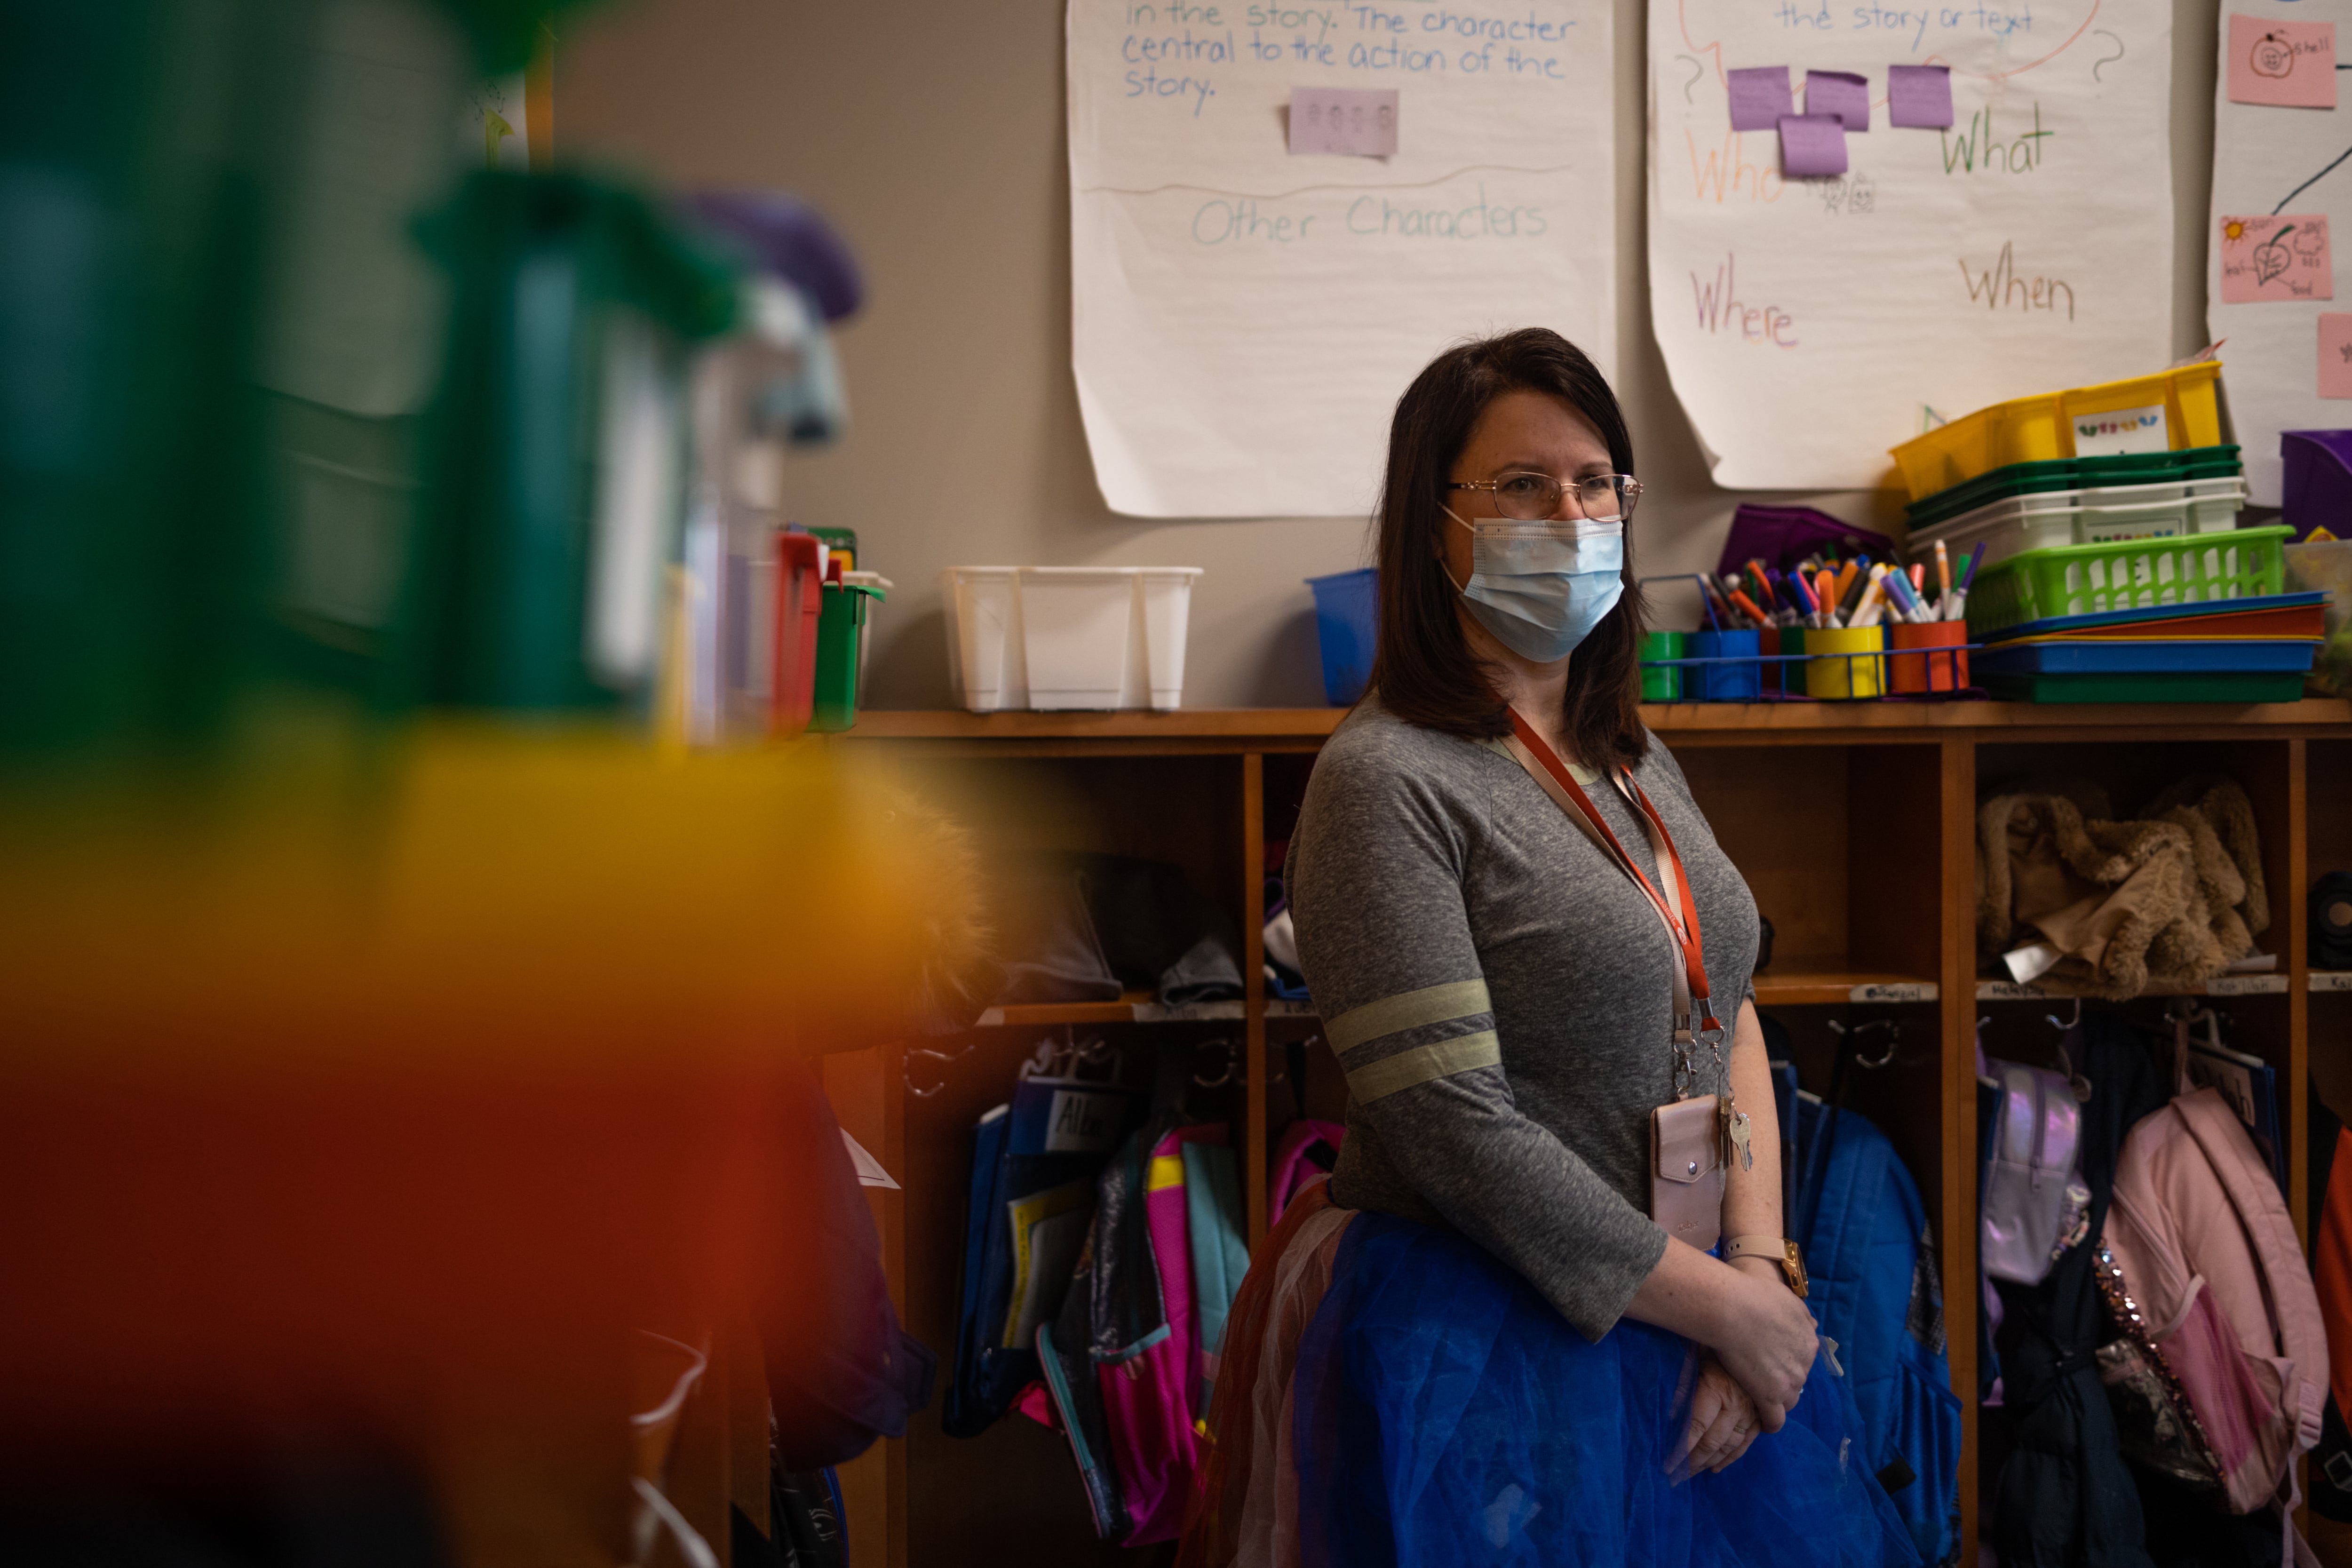 Teacher Ruth Llorens stands in front of book cases and wears face mask inside her classroom at Cayuga Elementary School.